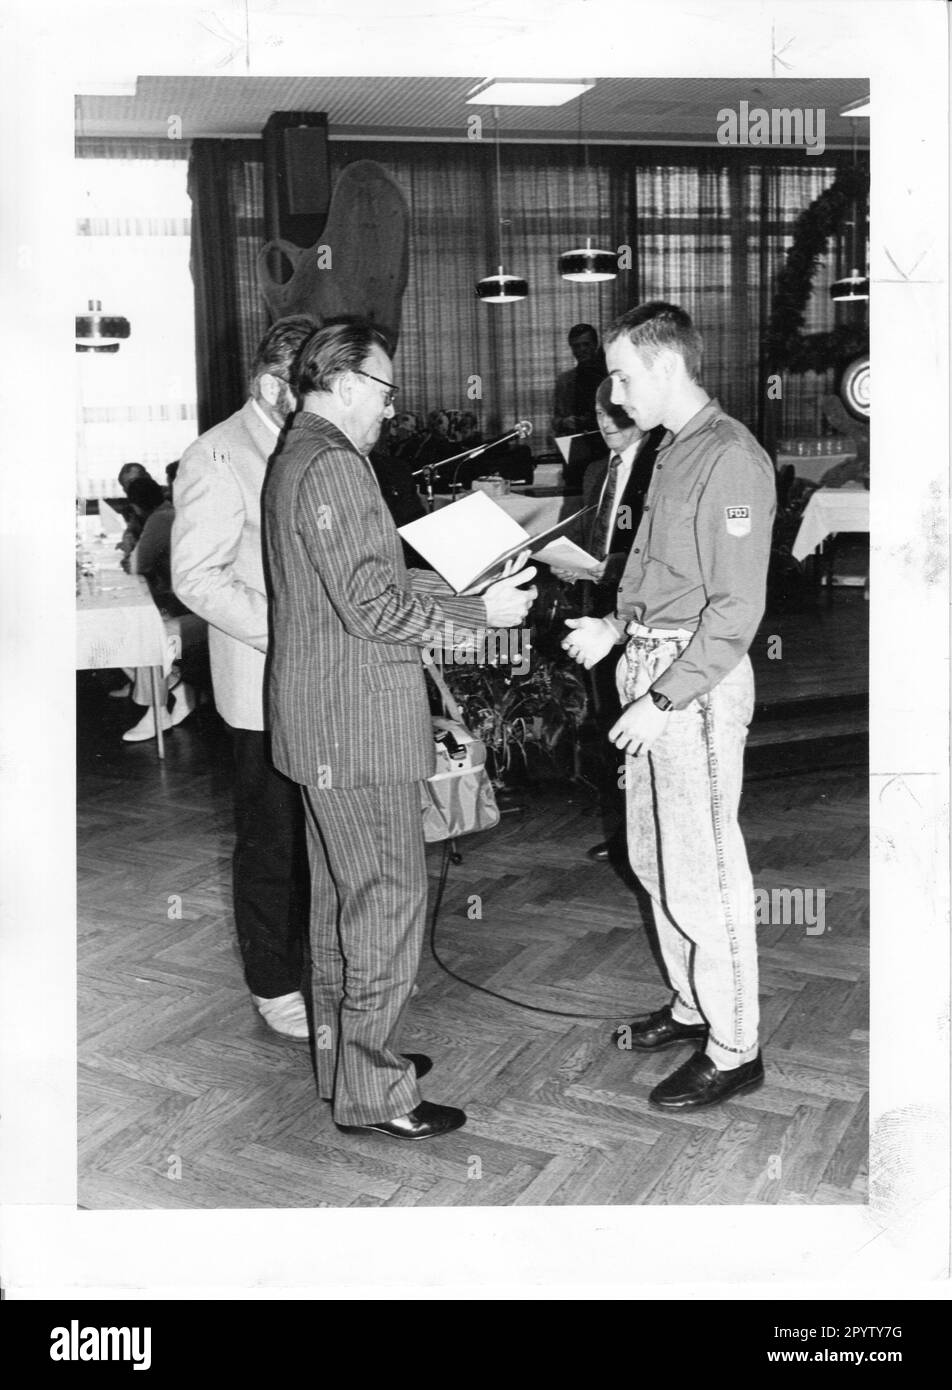 Prof. Dr. Kuhn, Deputy State Secretary for Vocational Training, honors Thomas Brückner for his outstanding performance in the international bricklaying competition in Potsdam. Competition. Performance comparison. Award. GDR. Historic. Turn. Apprentice. Bricklayer. Turning point. Photo. Joachim Liebe, 22.06.1989 [automated translation] Stock Photo